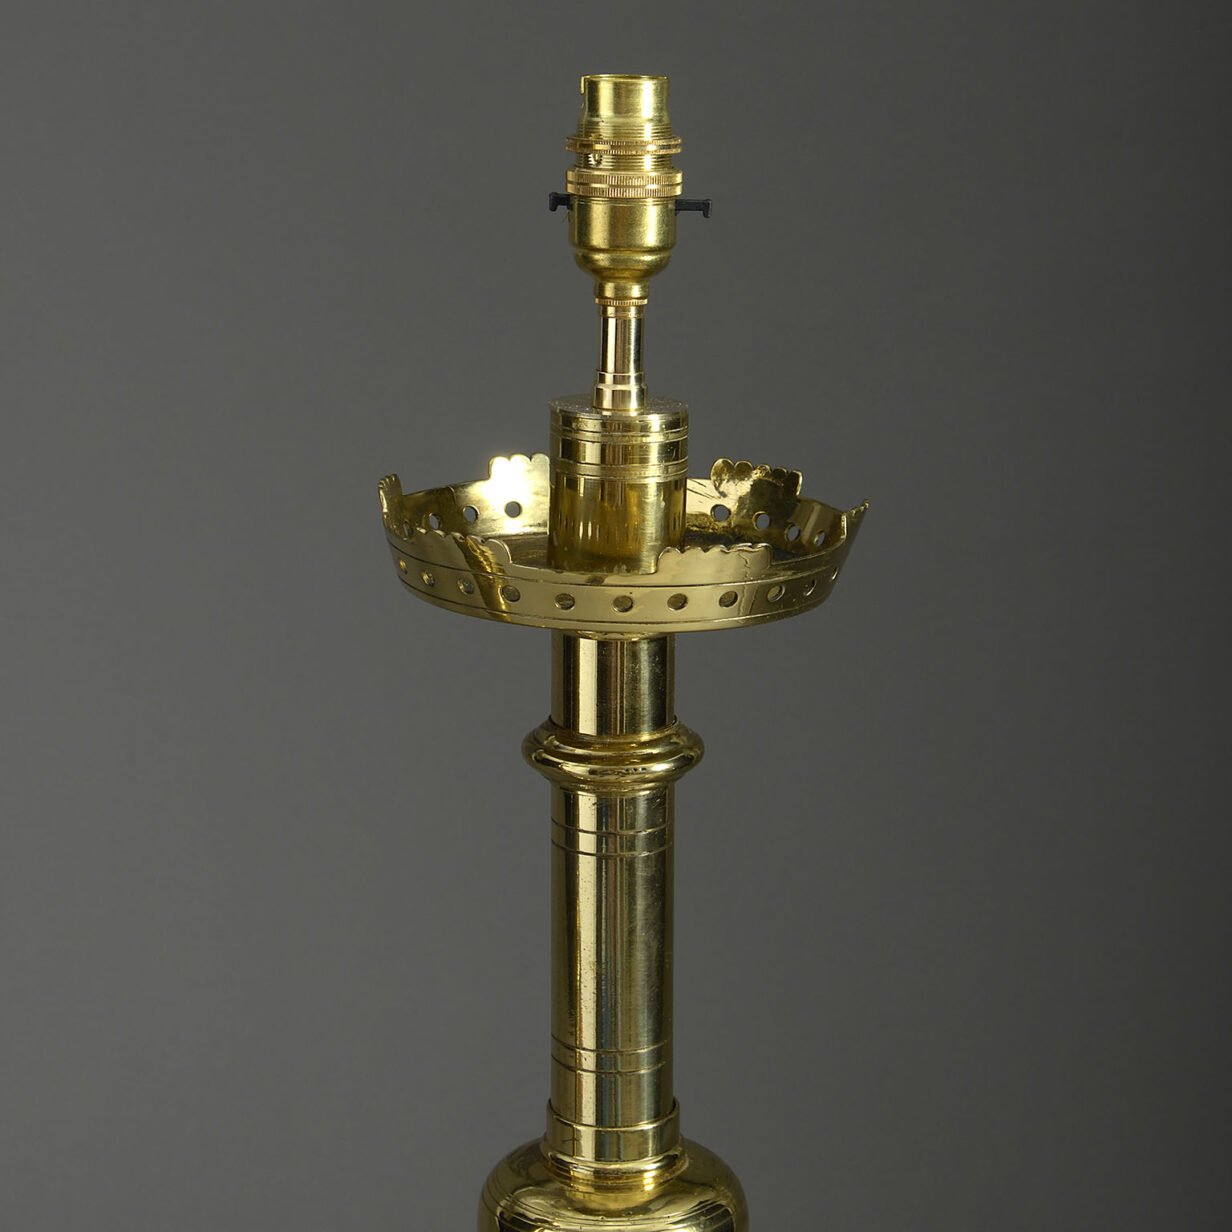 Pair of brass gothic lamps